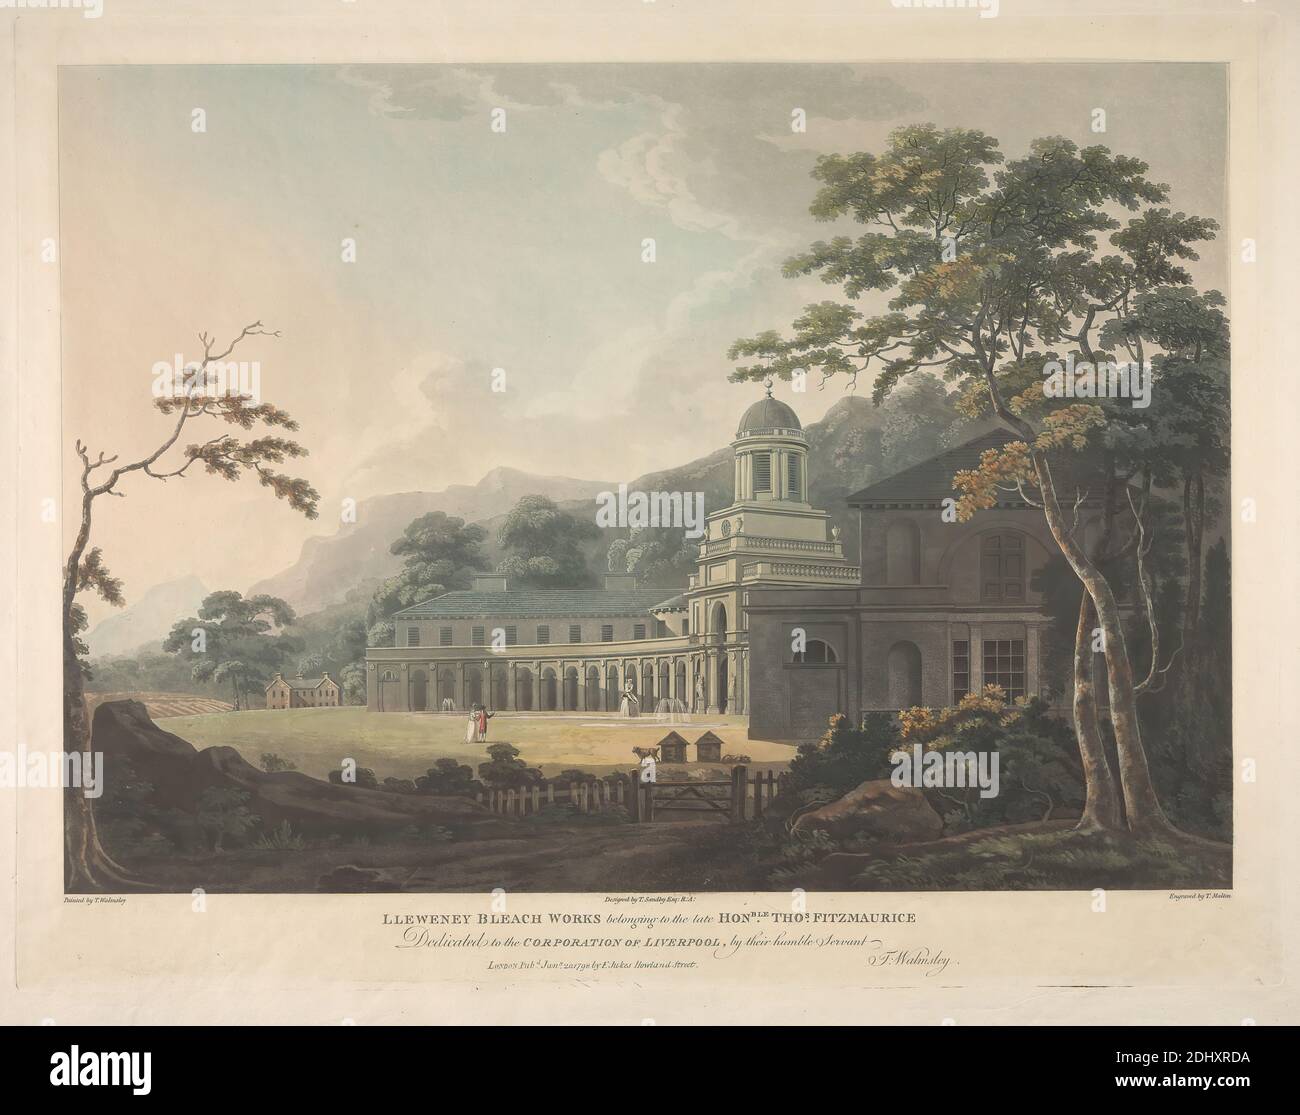 Lleweney Bleach Works, Thomas Malton, 1726–1801, British, after Thomas Walmsley, 1763–1806, Irish, 1798, Hand-colored aquatint on moderately thick, slightly textured, cream, wove paper, Sheet: 20 5/8 × 25 7/8 inches (52.4 × 65.7 cm), Plate: 19 1/8 × 24 7/8 inches (48.6 × 63.2 cm), and Image: 16 1/4 × 22 15/16 inches (41.3 × 58.3 cm Stock Photo